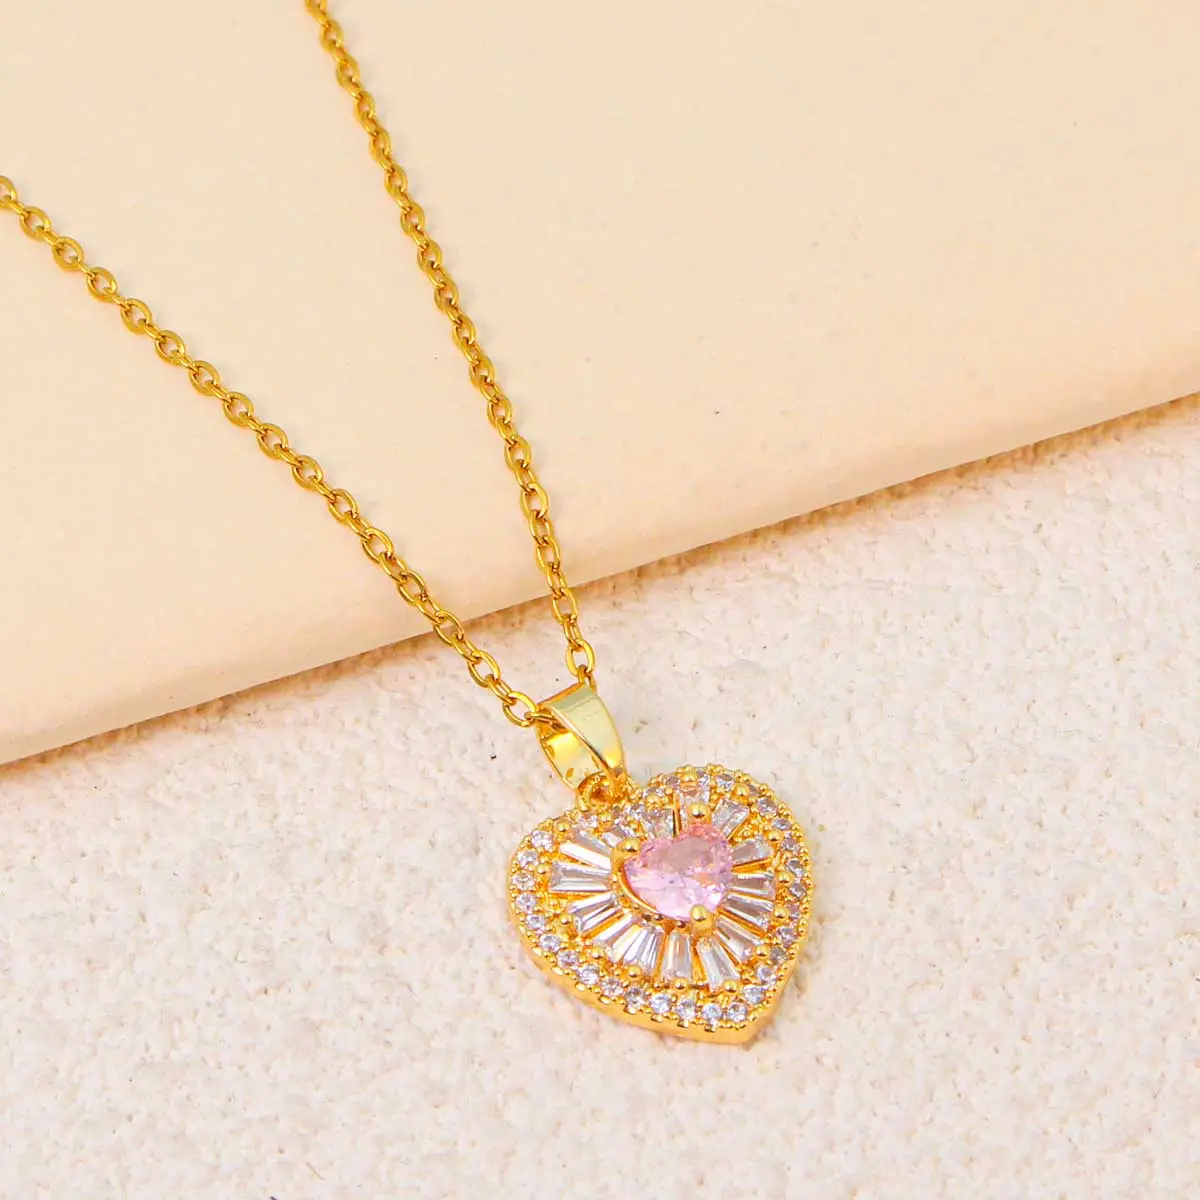 Women's fashion accessory cubic zirconia pink heart-shaped gold-plated copper pendant necklace suitable for daily wear by women